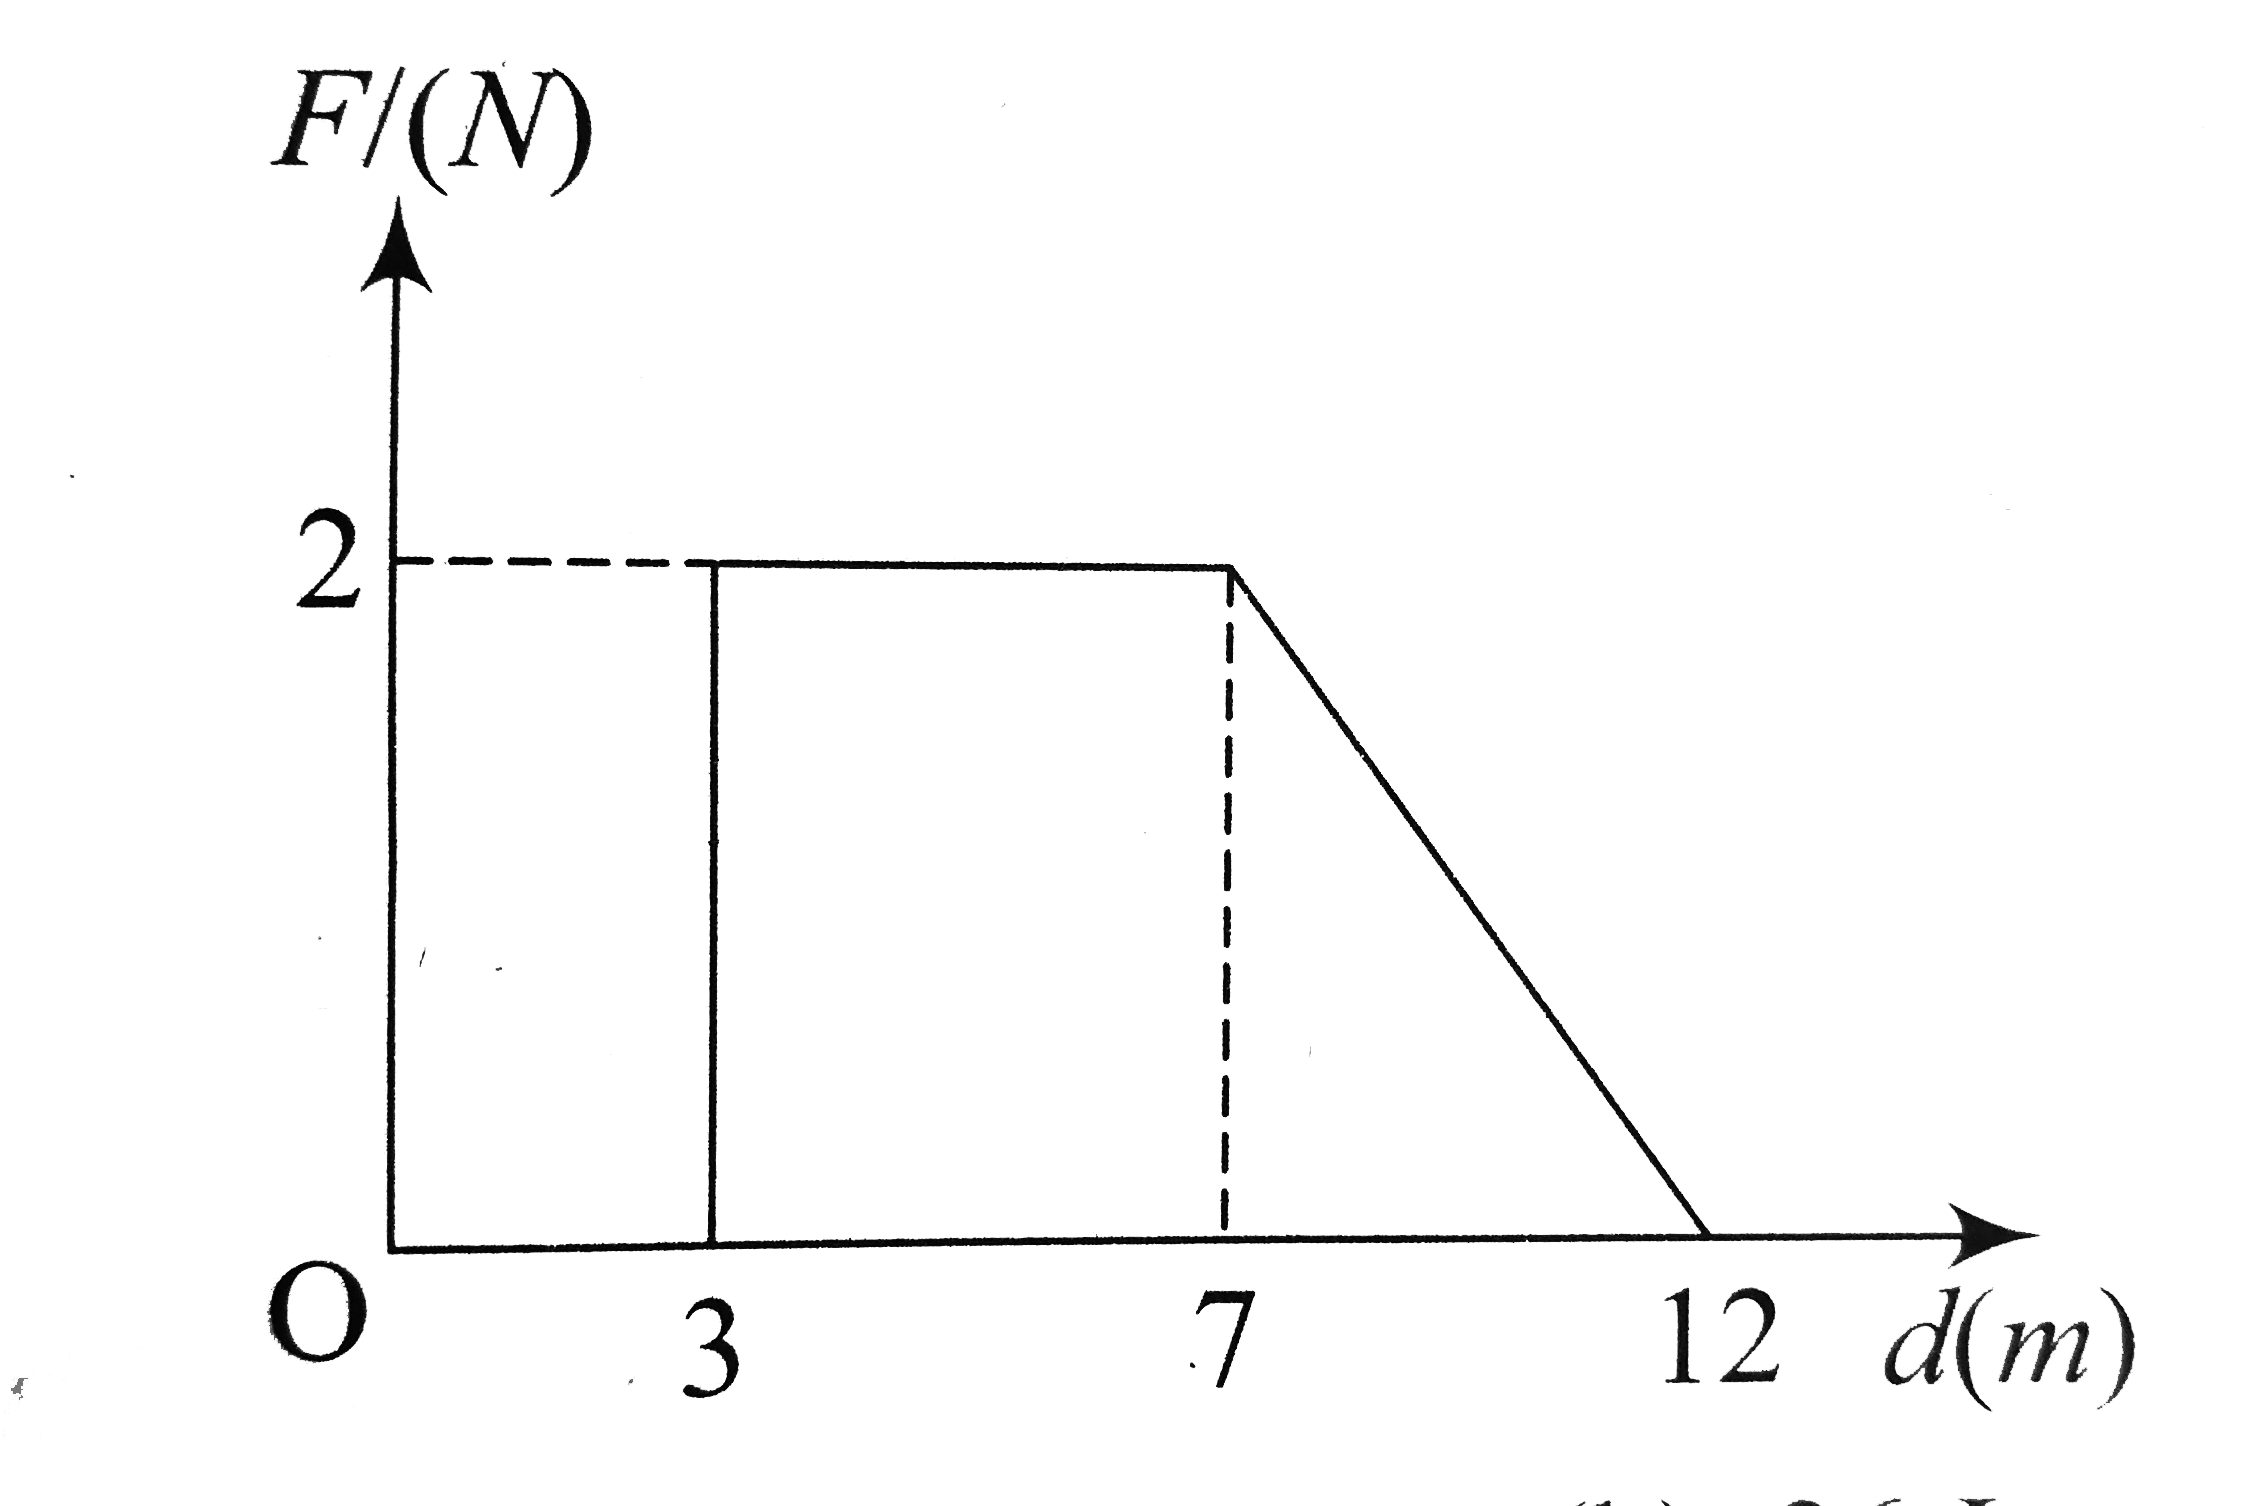 force F on a partical moving in a straight line veries with distance d as shown in the figure. The work done on the partical during its displacement of 12 m is